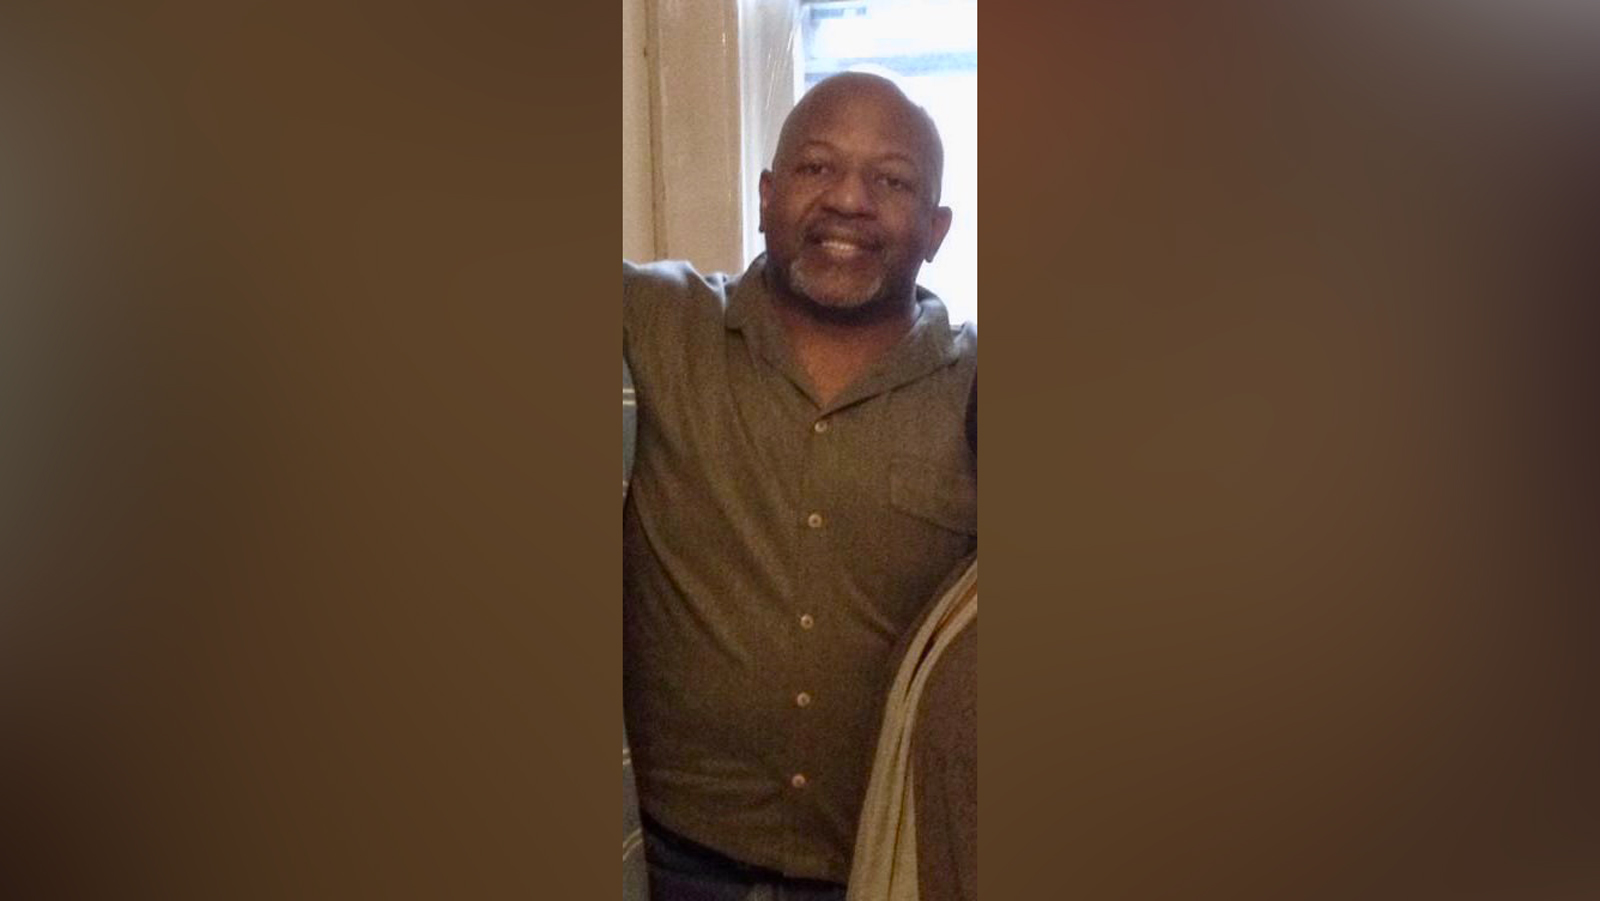 Brittany Talley said she last heard from her grandfather, Timm “TK” Williams Sr., on Wednesday afternoon as he was evacuating the area of Kaanapali, Hawaii.